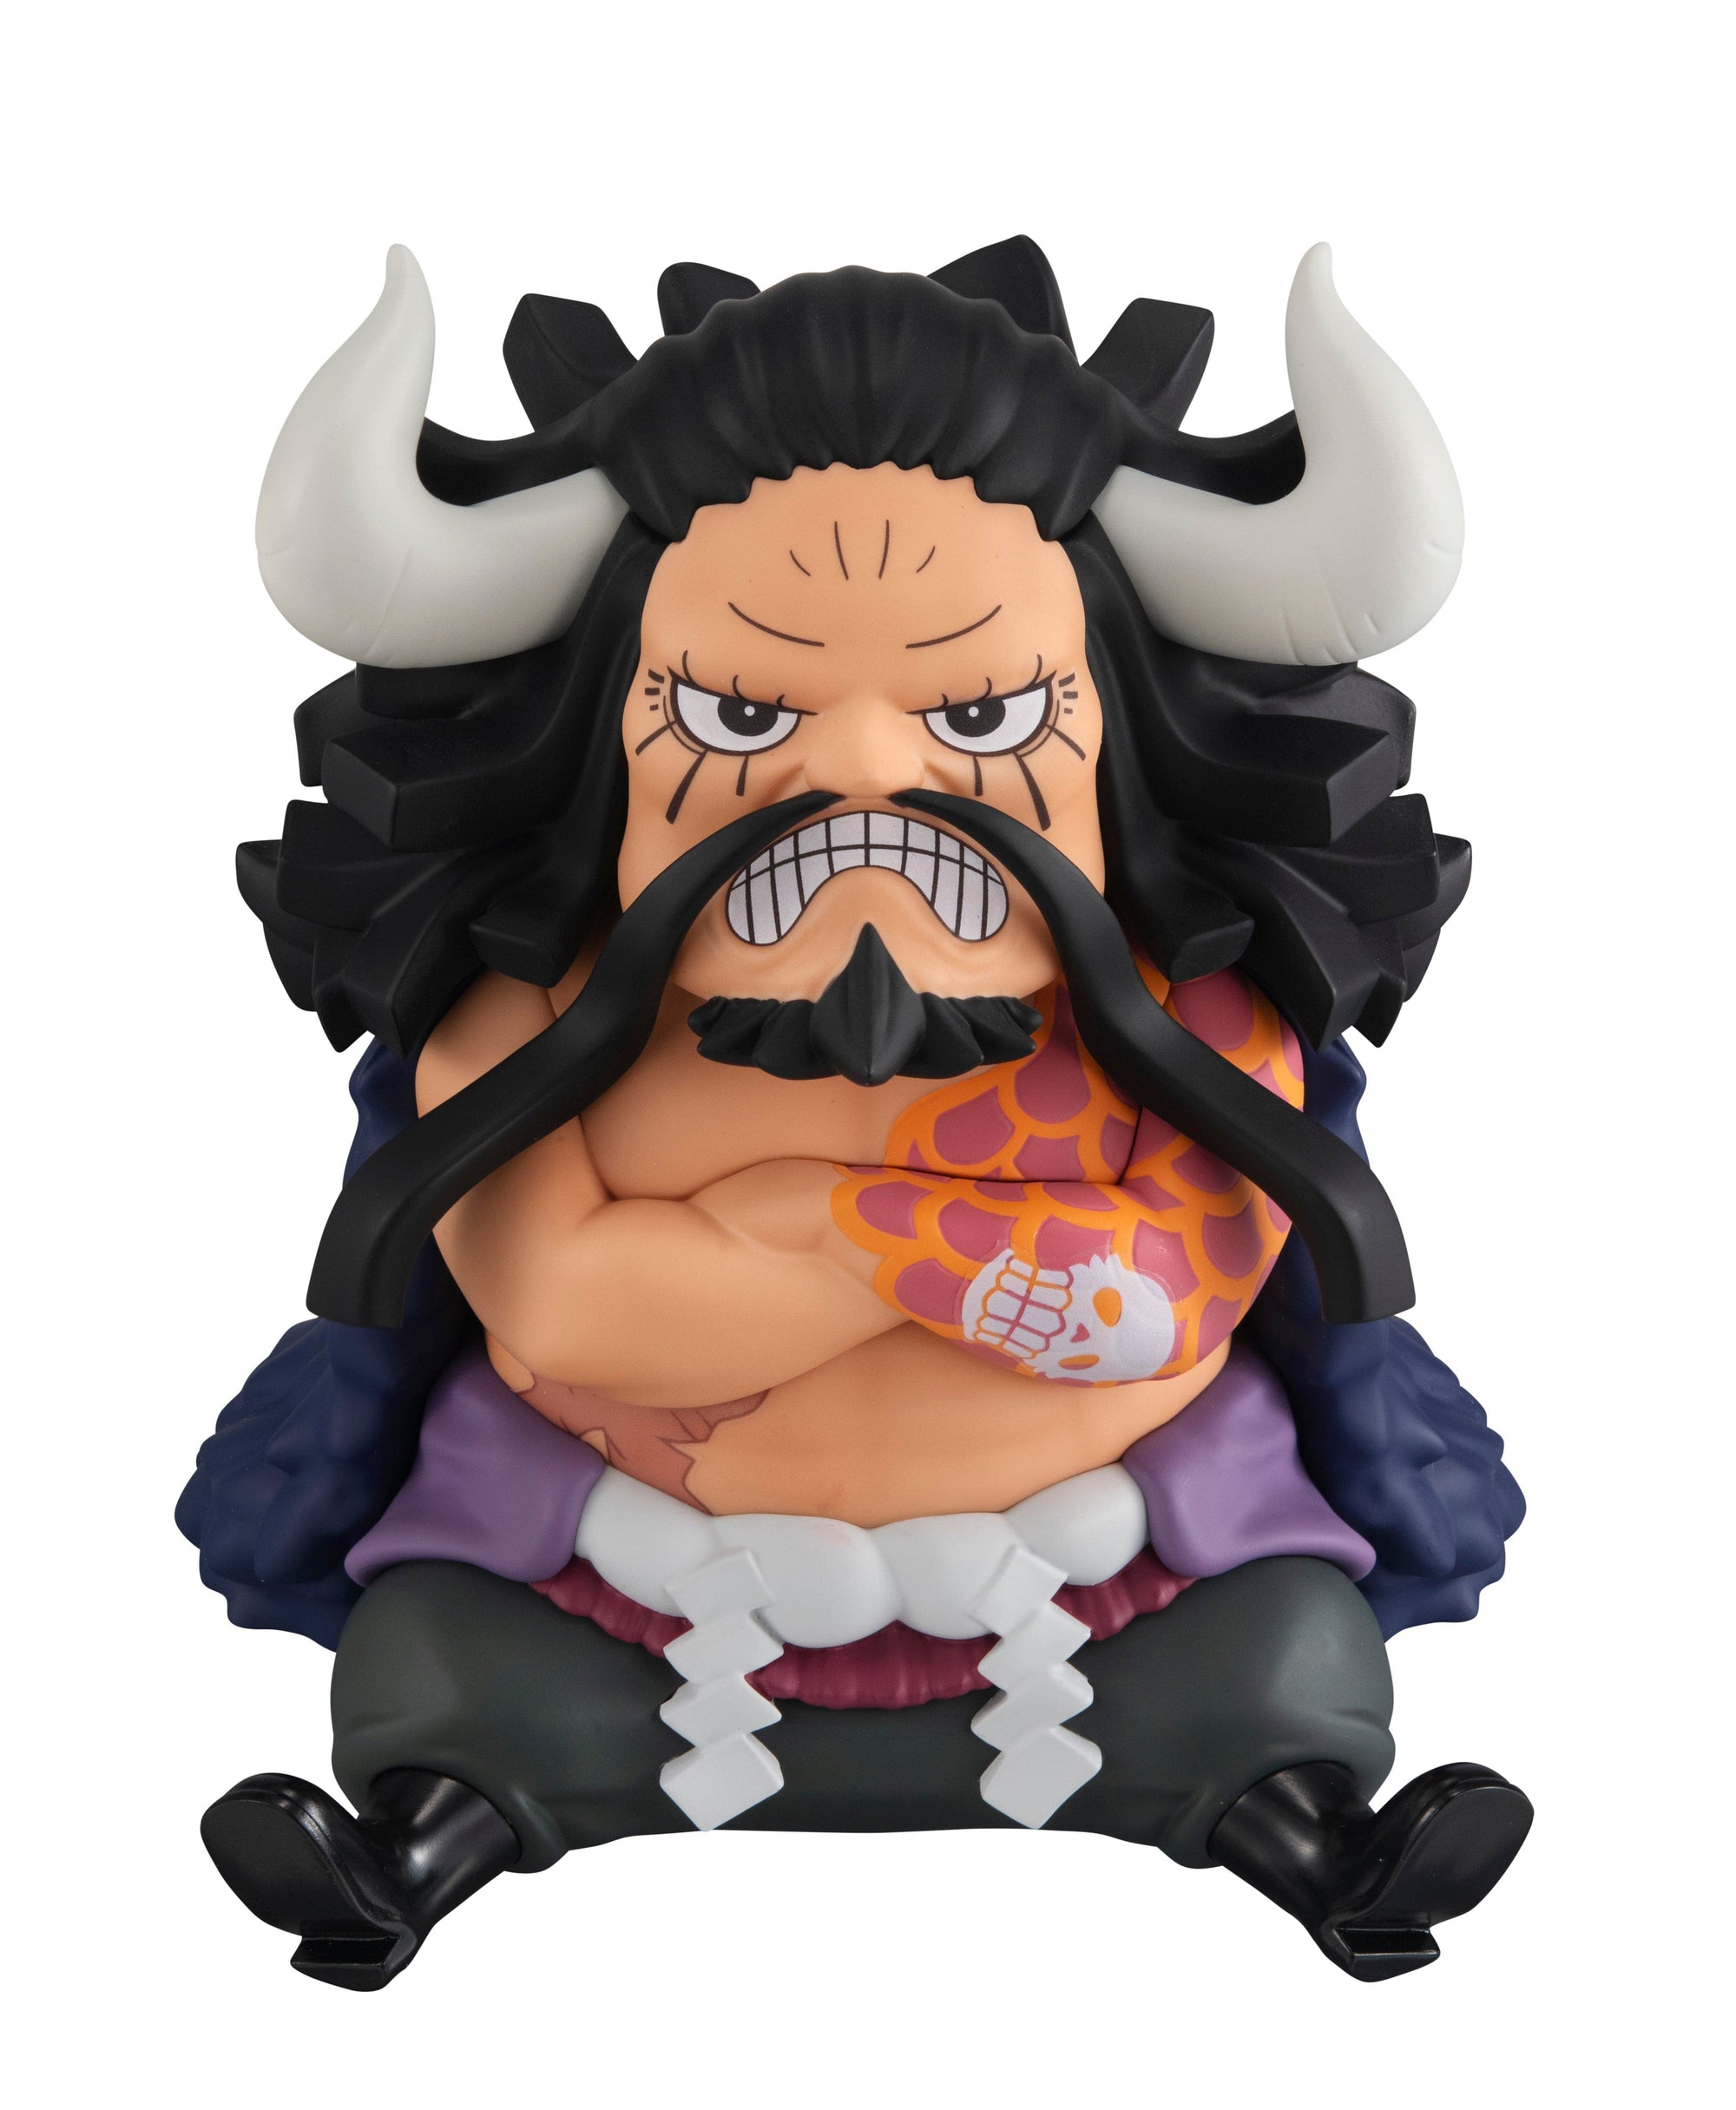 Megahouse LOOK UP SERIES ONE PIECE Kaido the Beast